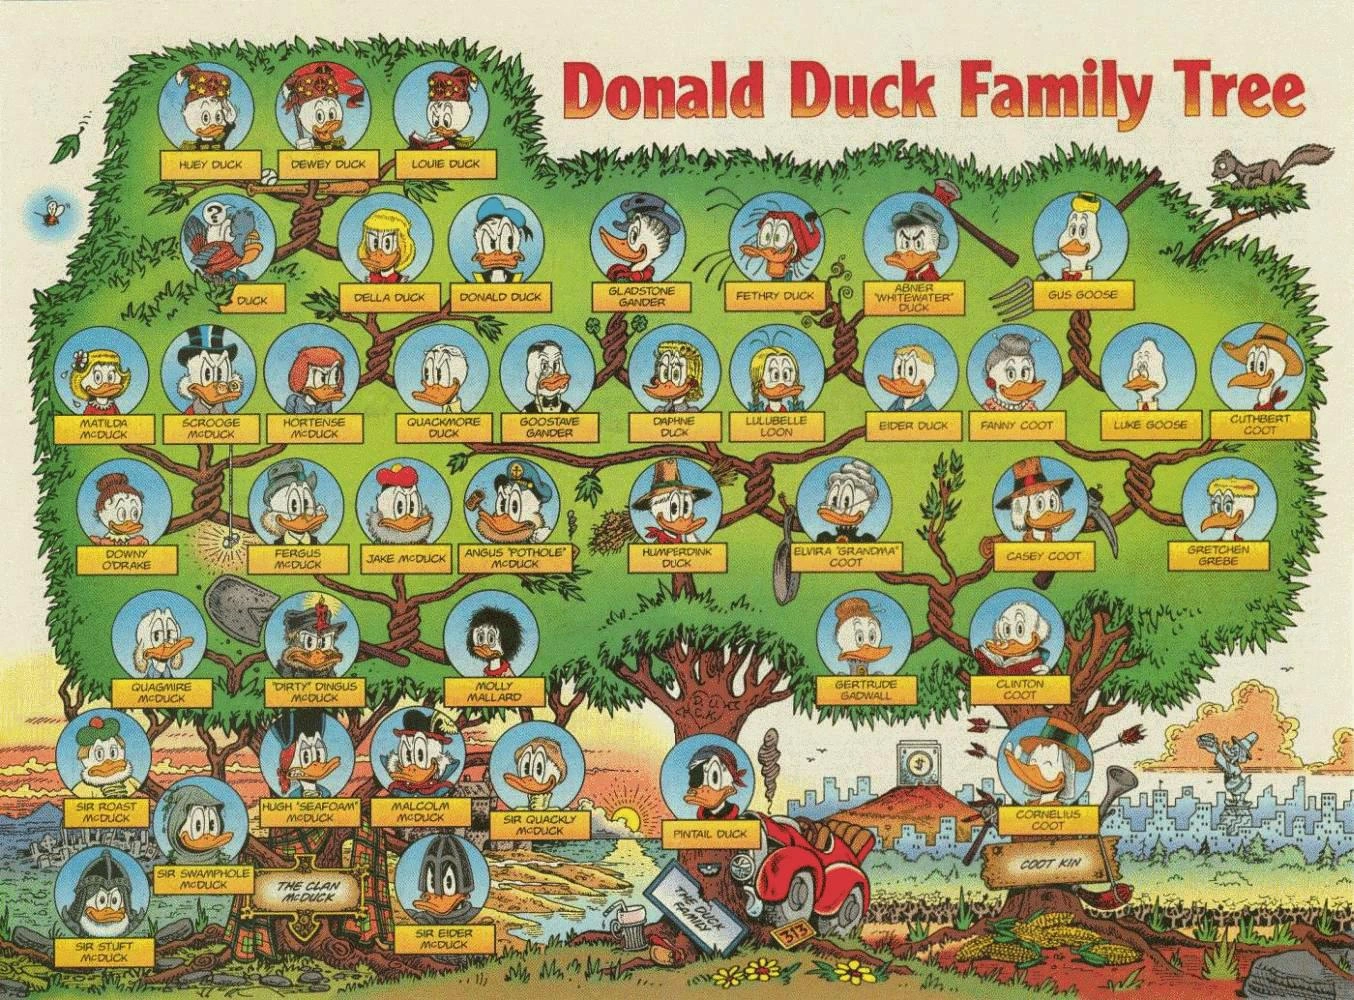 Post #11555959 - Humor, Genealogical tree, Donald Duck, Scrooge McDuck, Images, Relatives, High resolution, Jackal, Reply to post